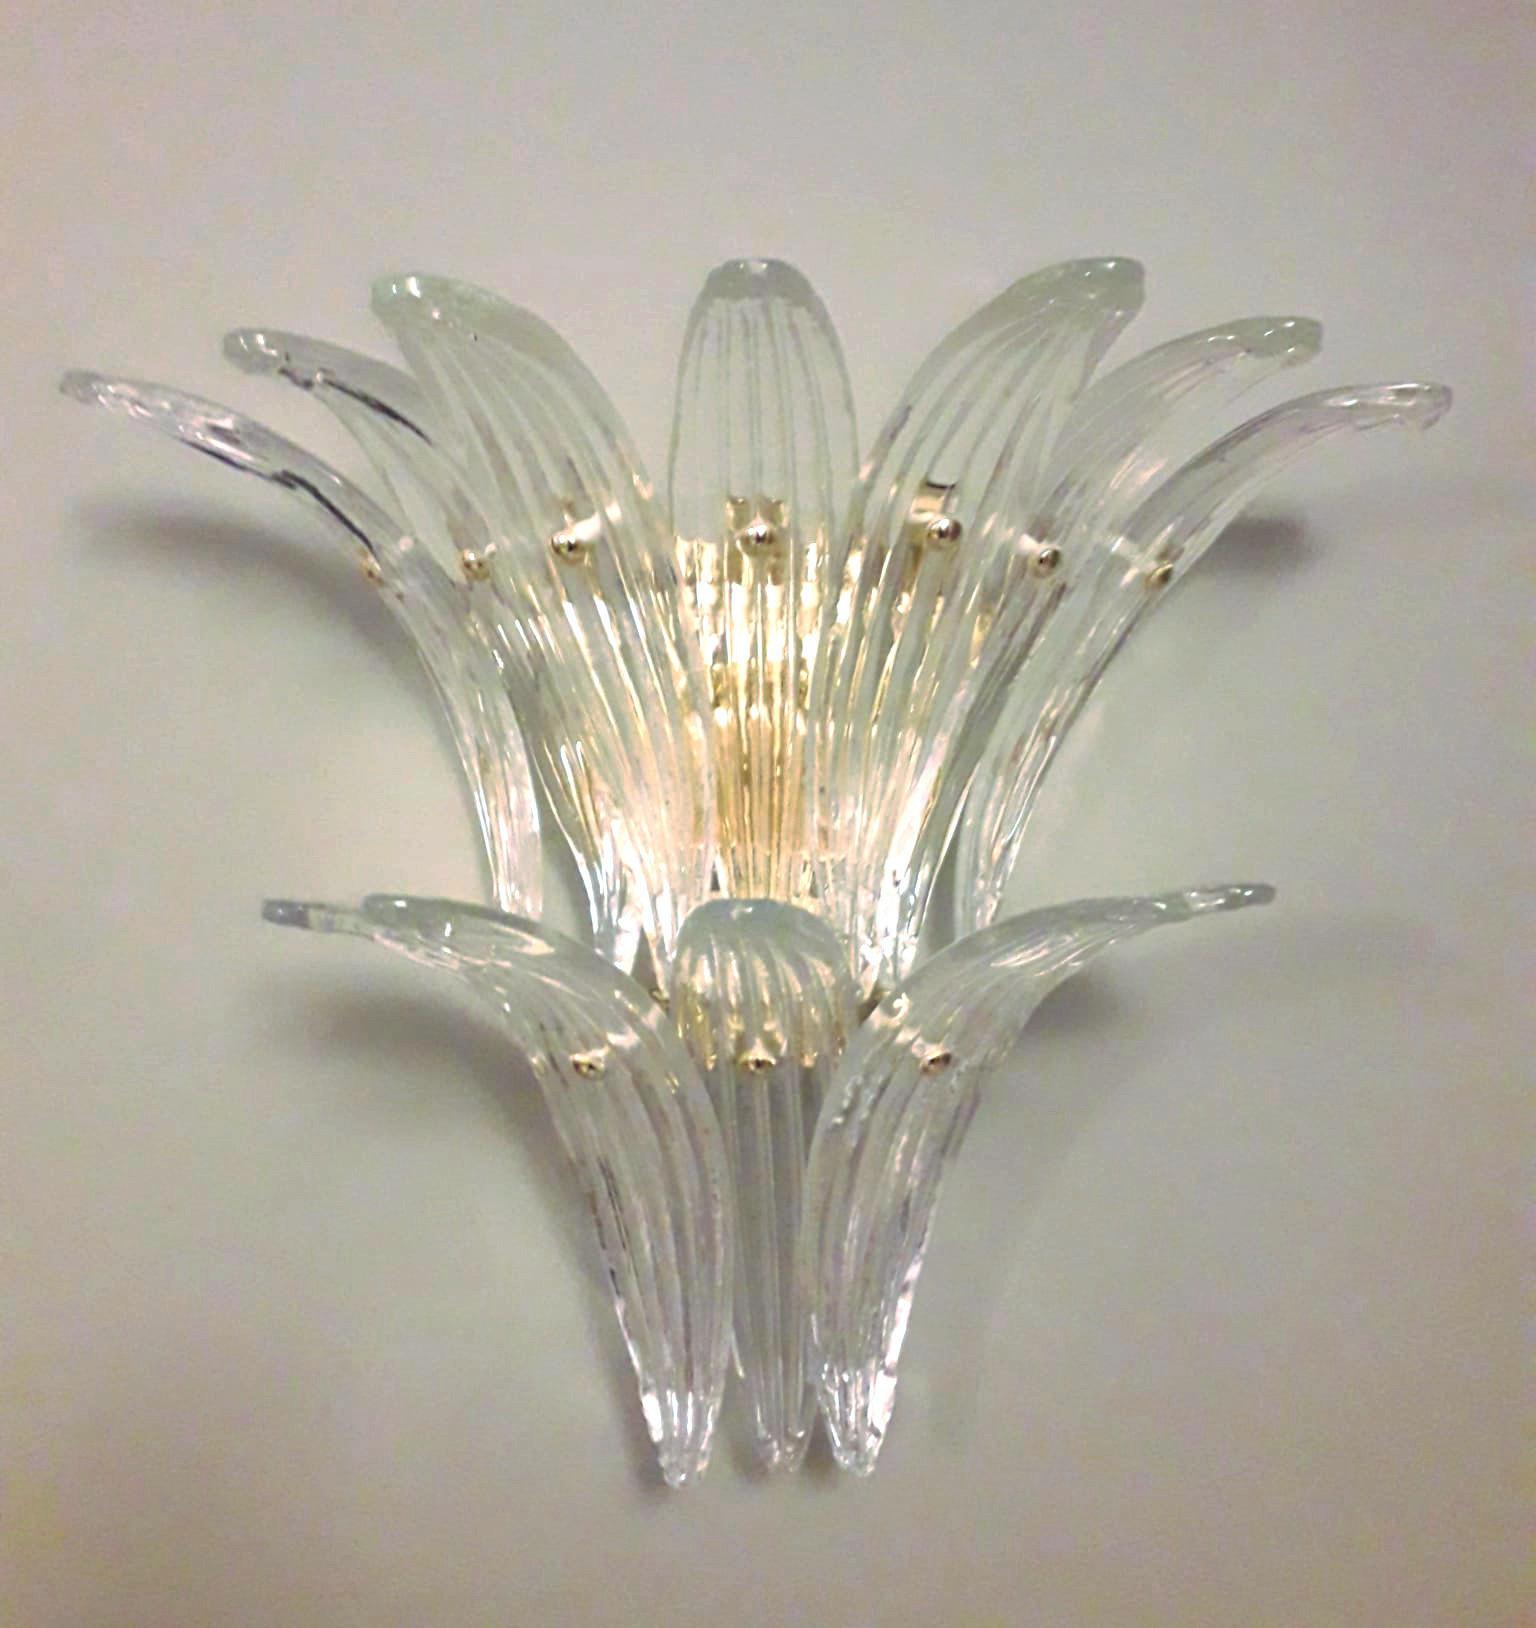 Italian wall light with vintage clear Murano palmette glass leaves mounted on newly made gold finish metal frames / Made in Italy.
Measures: height 16 inches, width 18 inches, depth 9 inches.
2 Lights / E12 or E14 type / max 40W each.
2 Pairs